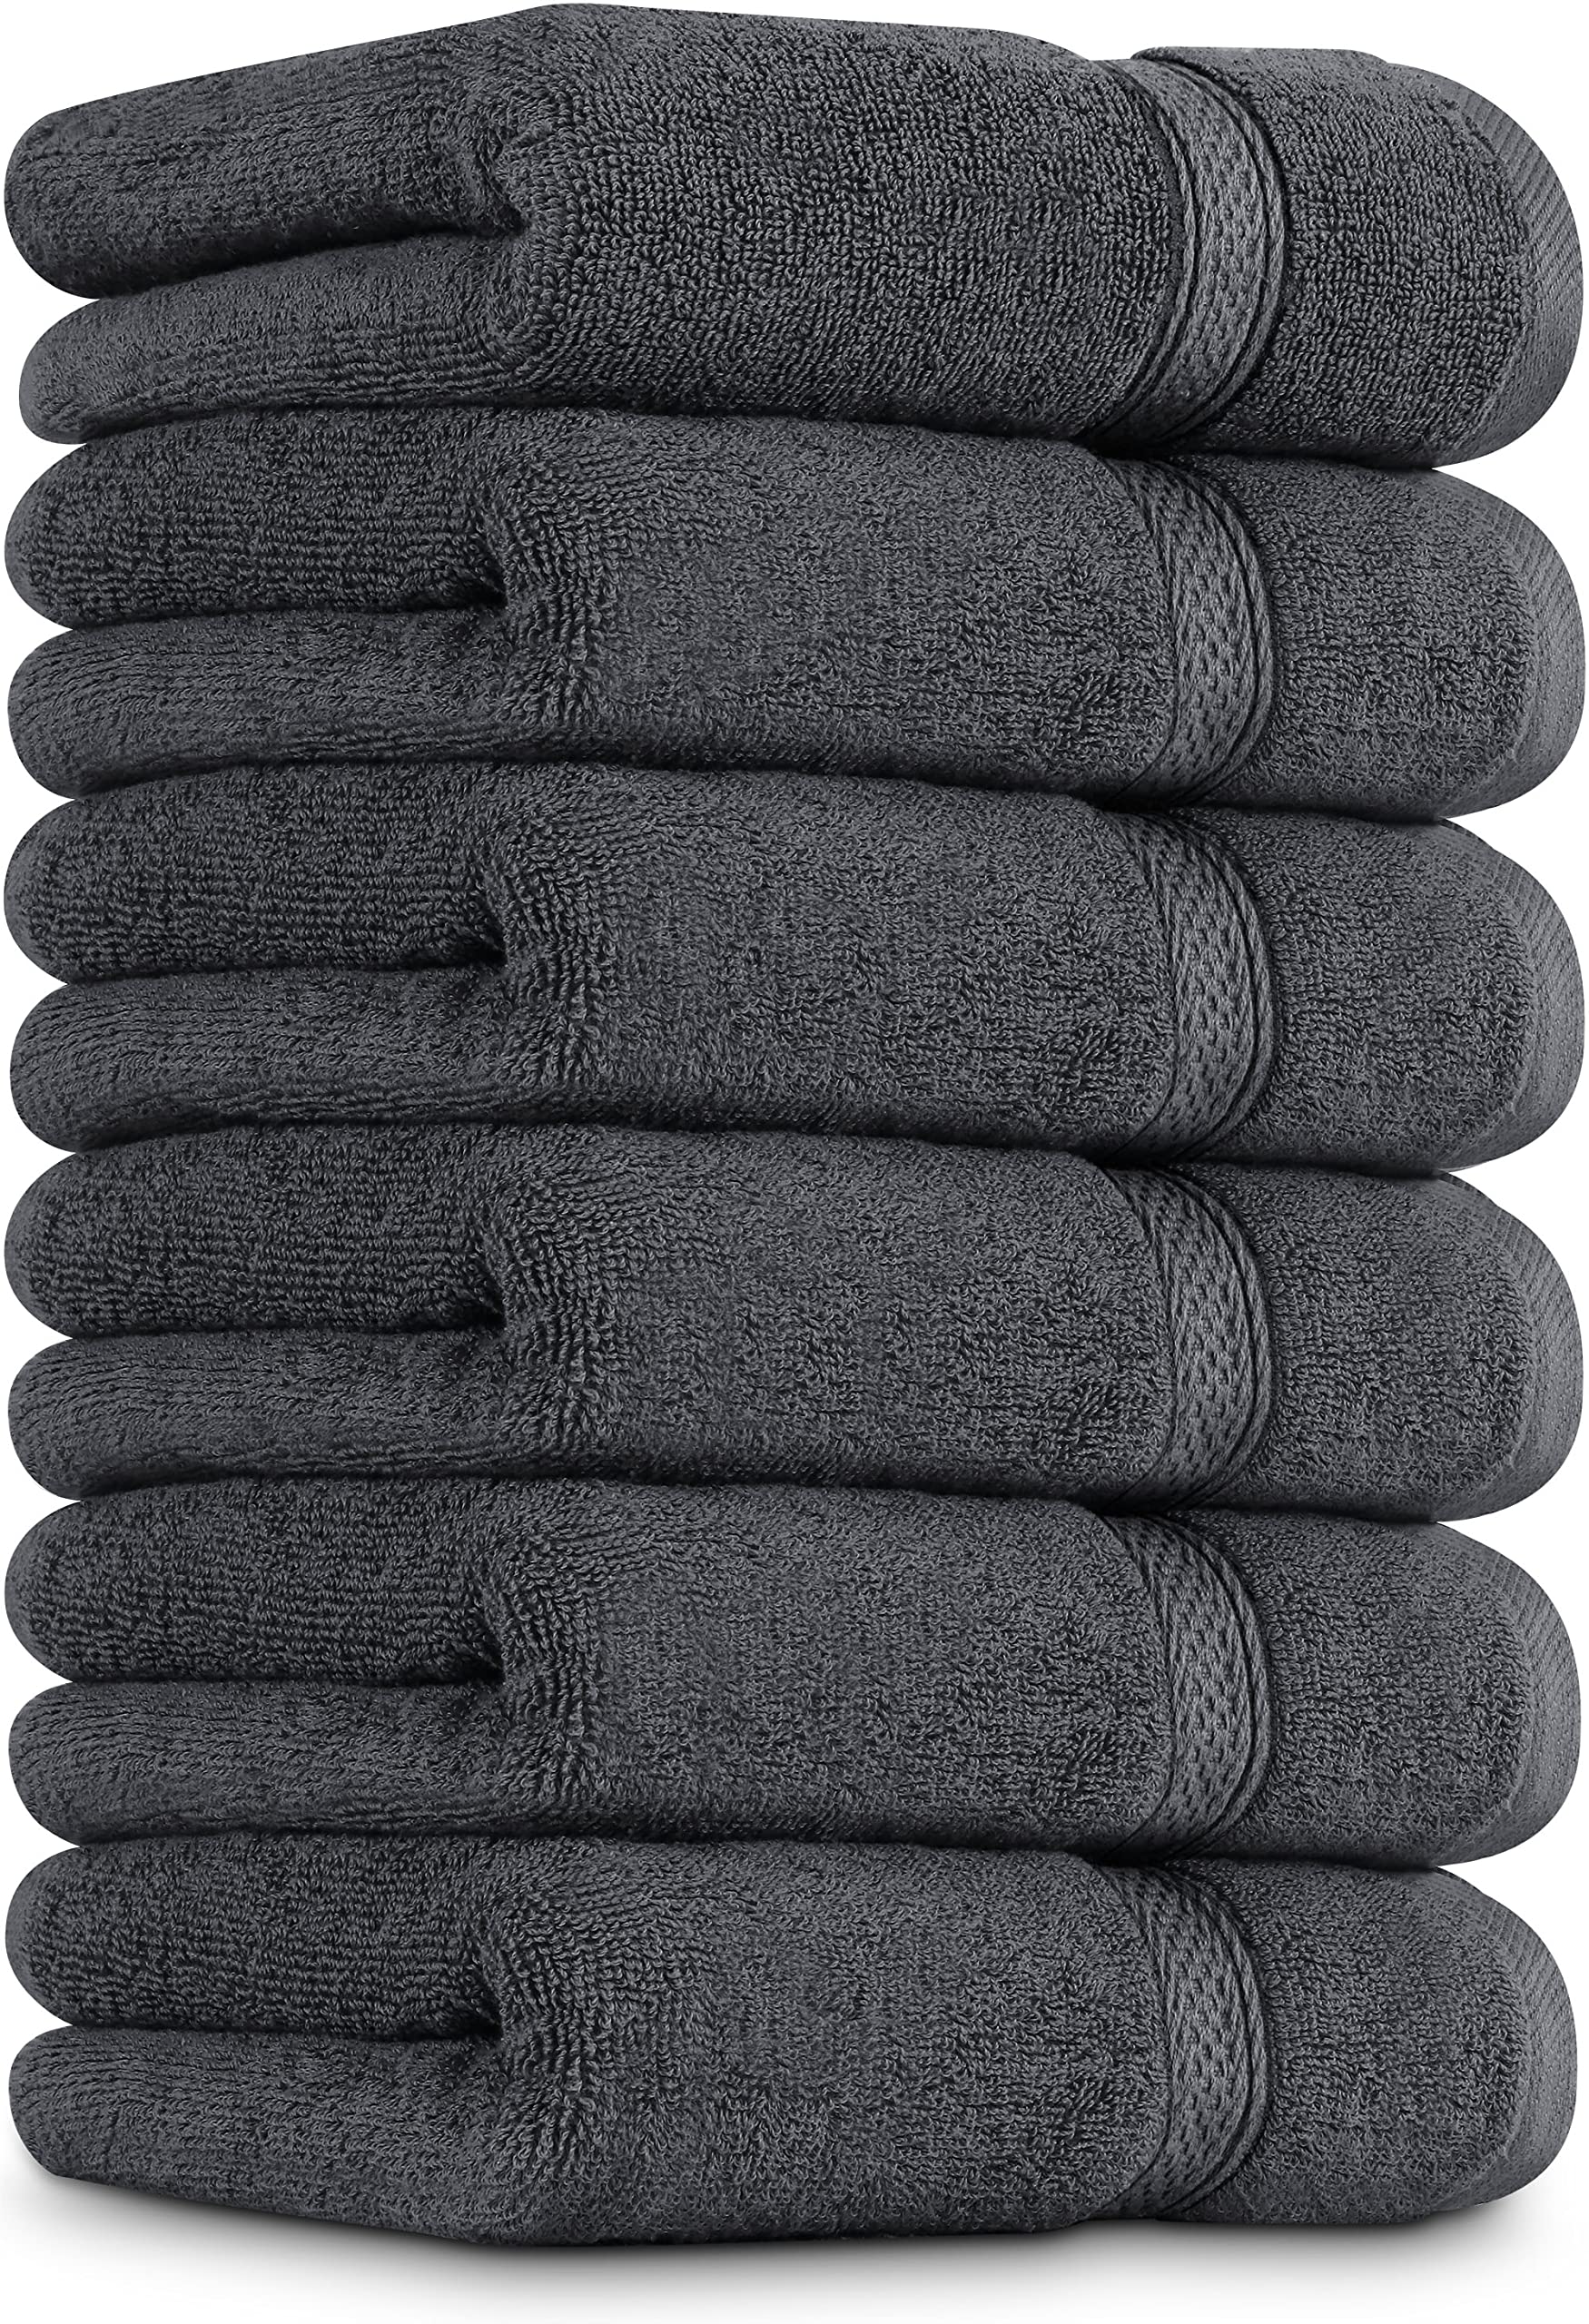 Utopia Towels - Hand Towel Set - Premium 100% Ring Spun Cotton - Quick Dry, Highly Absorbent, Soft Feel Towels, Perfect for Dail